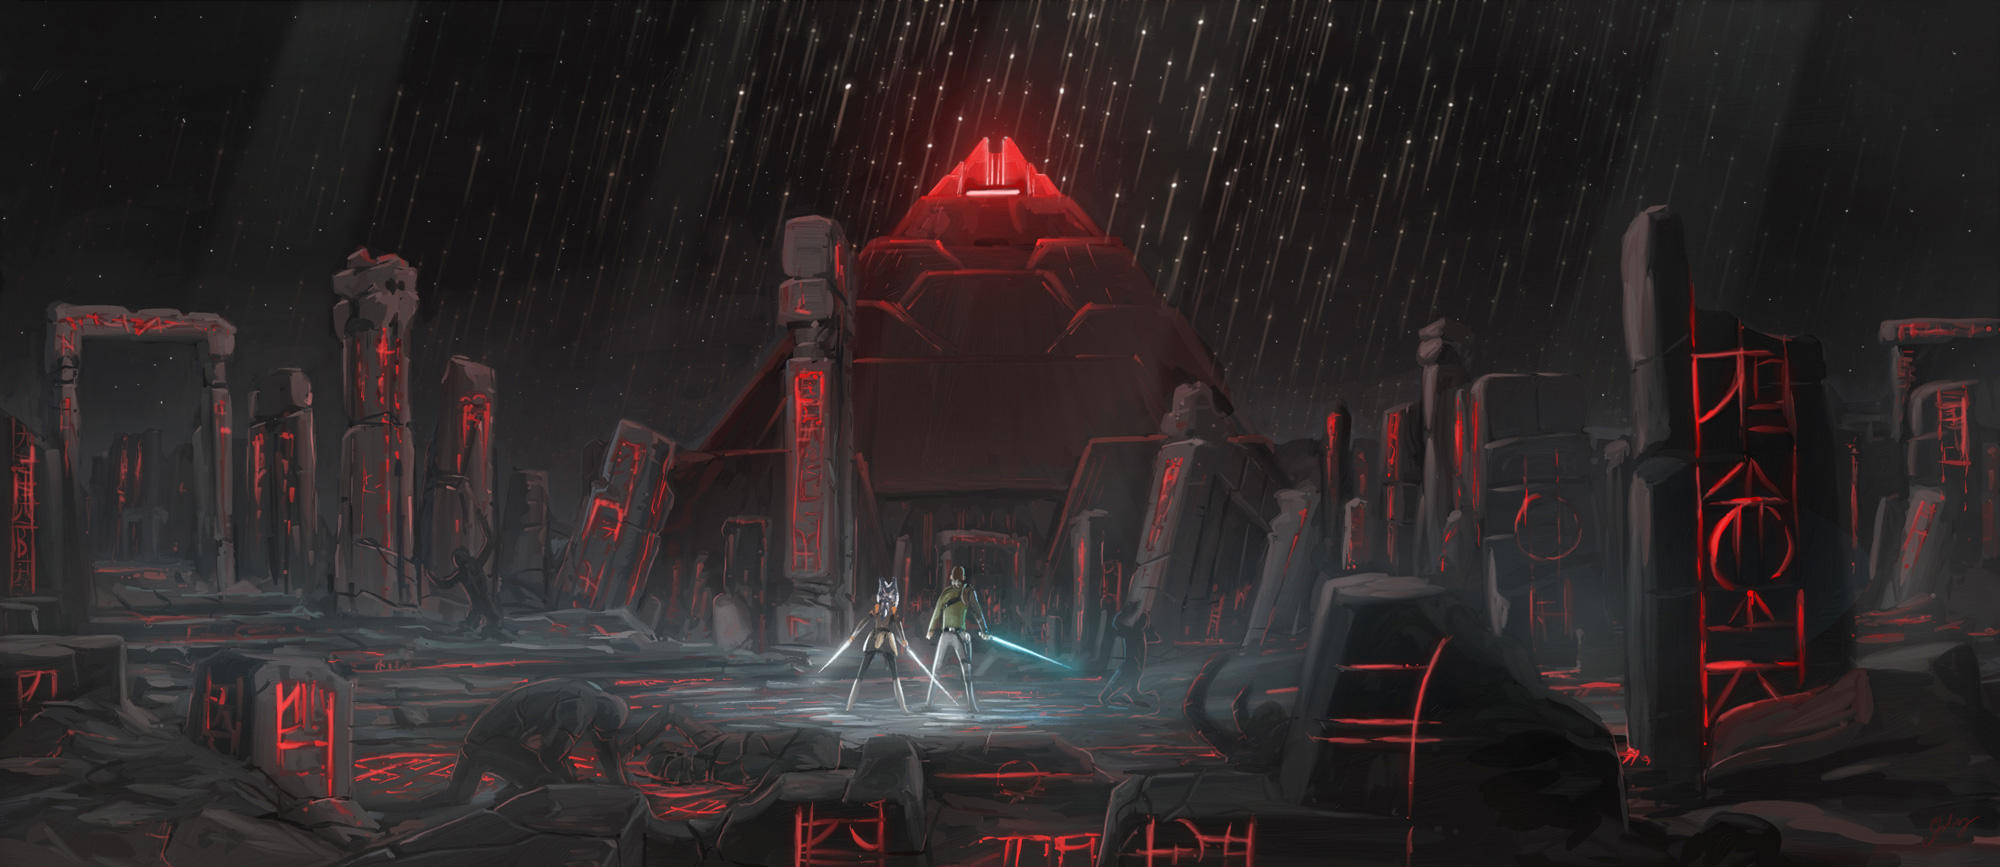 The sith temple